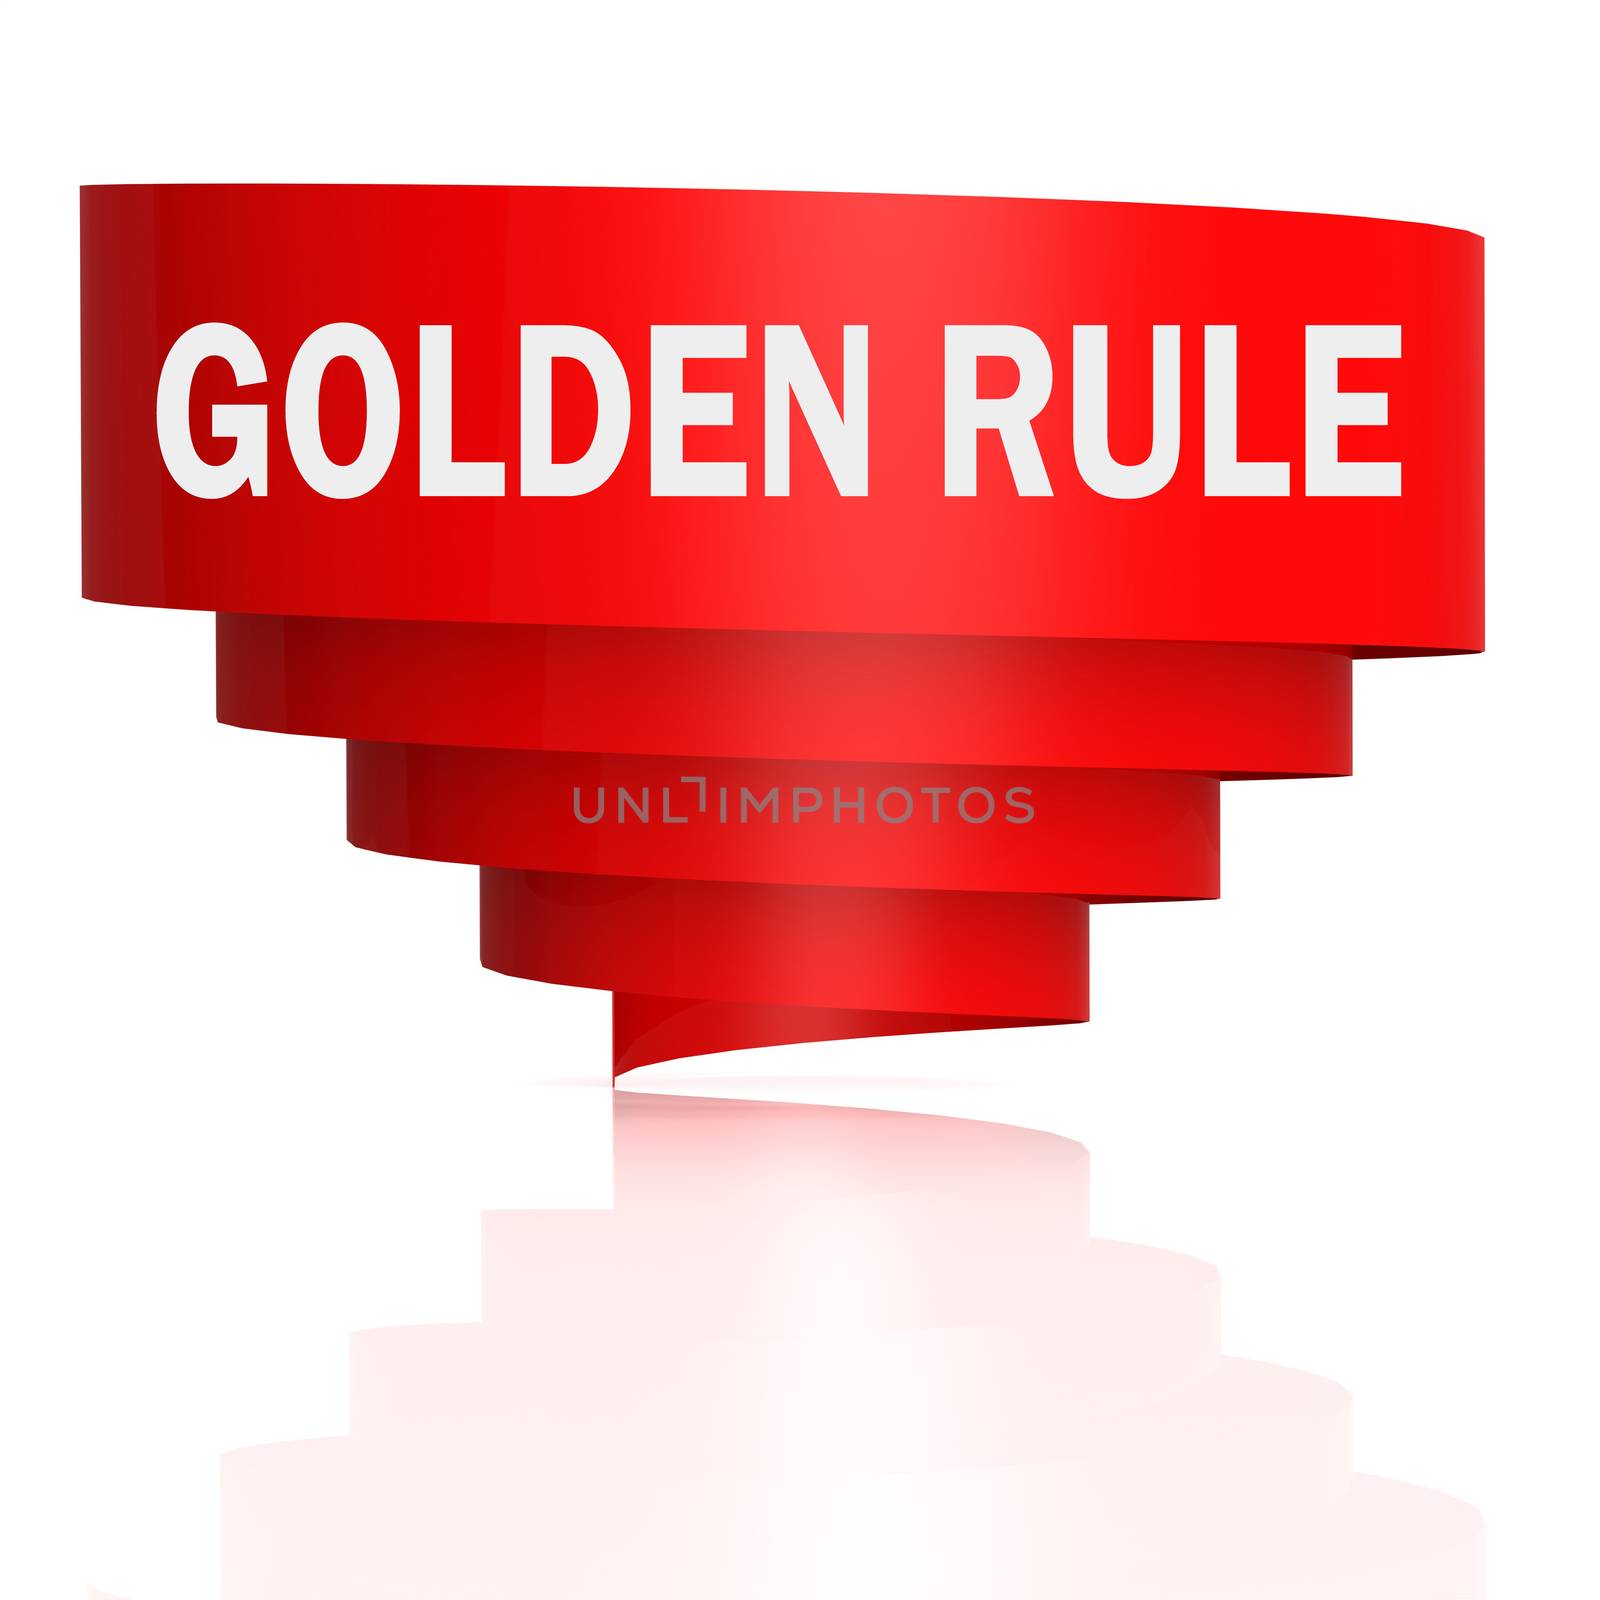 Golden rule word with red curve banner, 3D rendering